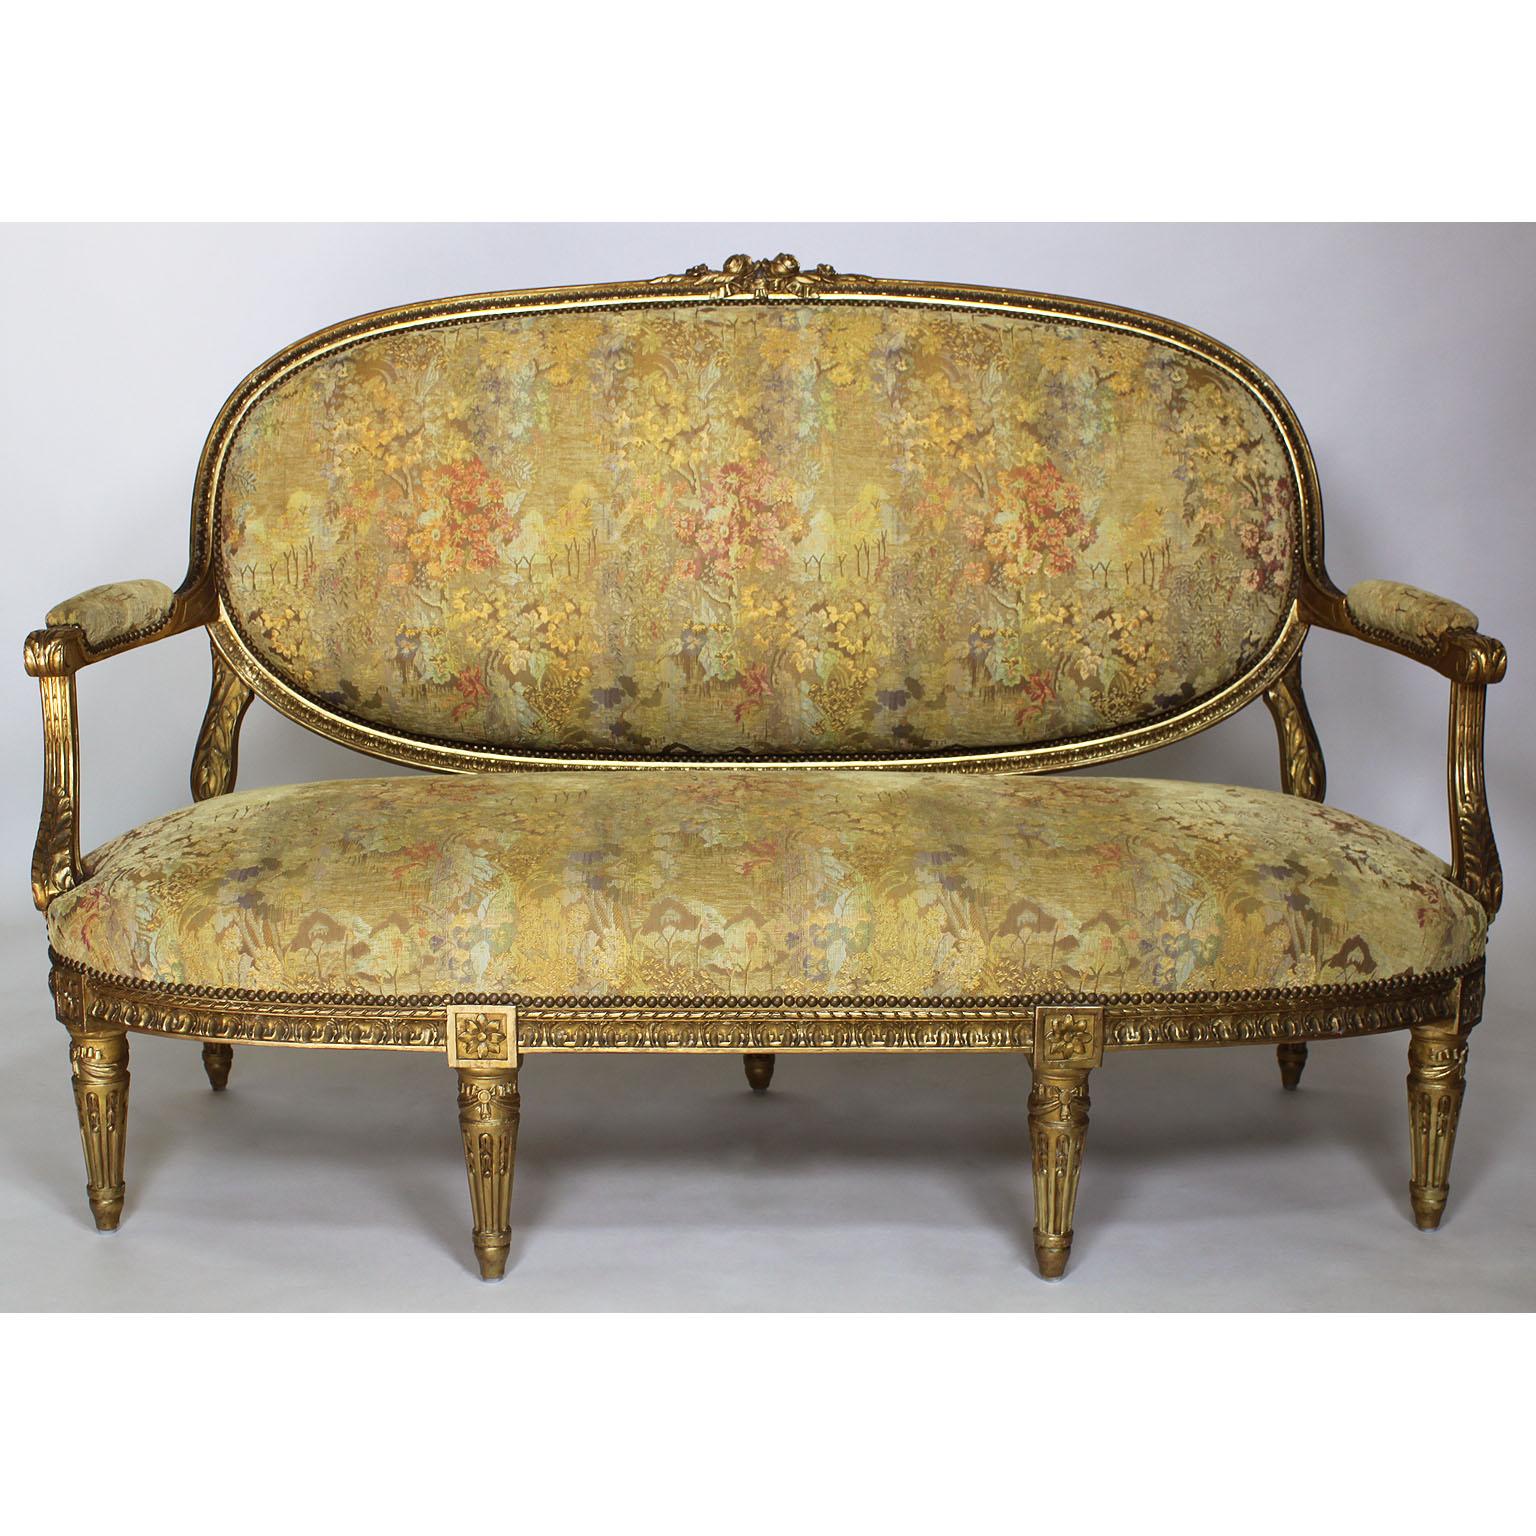 A very fine French 19th century Louis XVI style giltwood carved five-piece salon suite, comprising of a canapé and four fauteuils, all with recent upholstery. The finely carved frames with paneled back, padded arm supports and seats, with ribbon